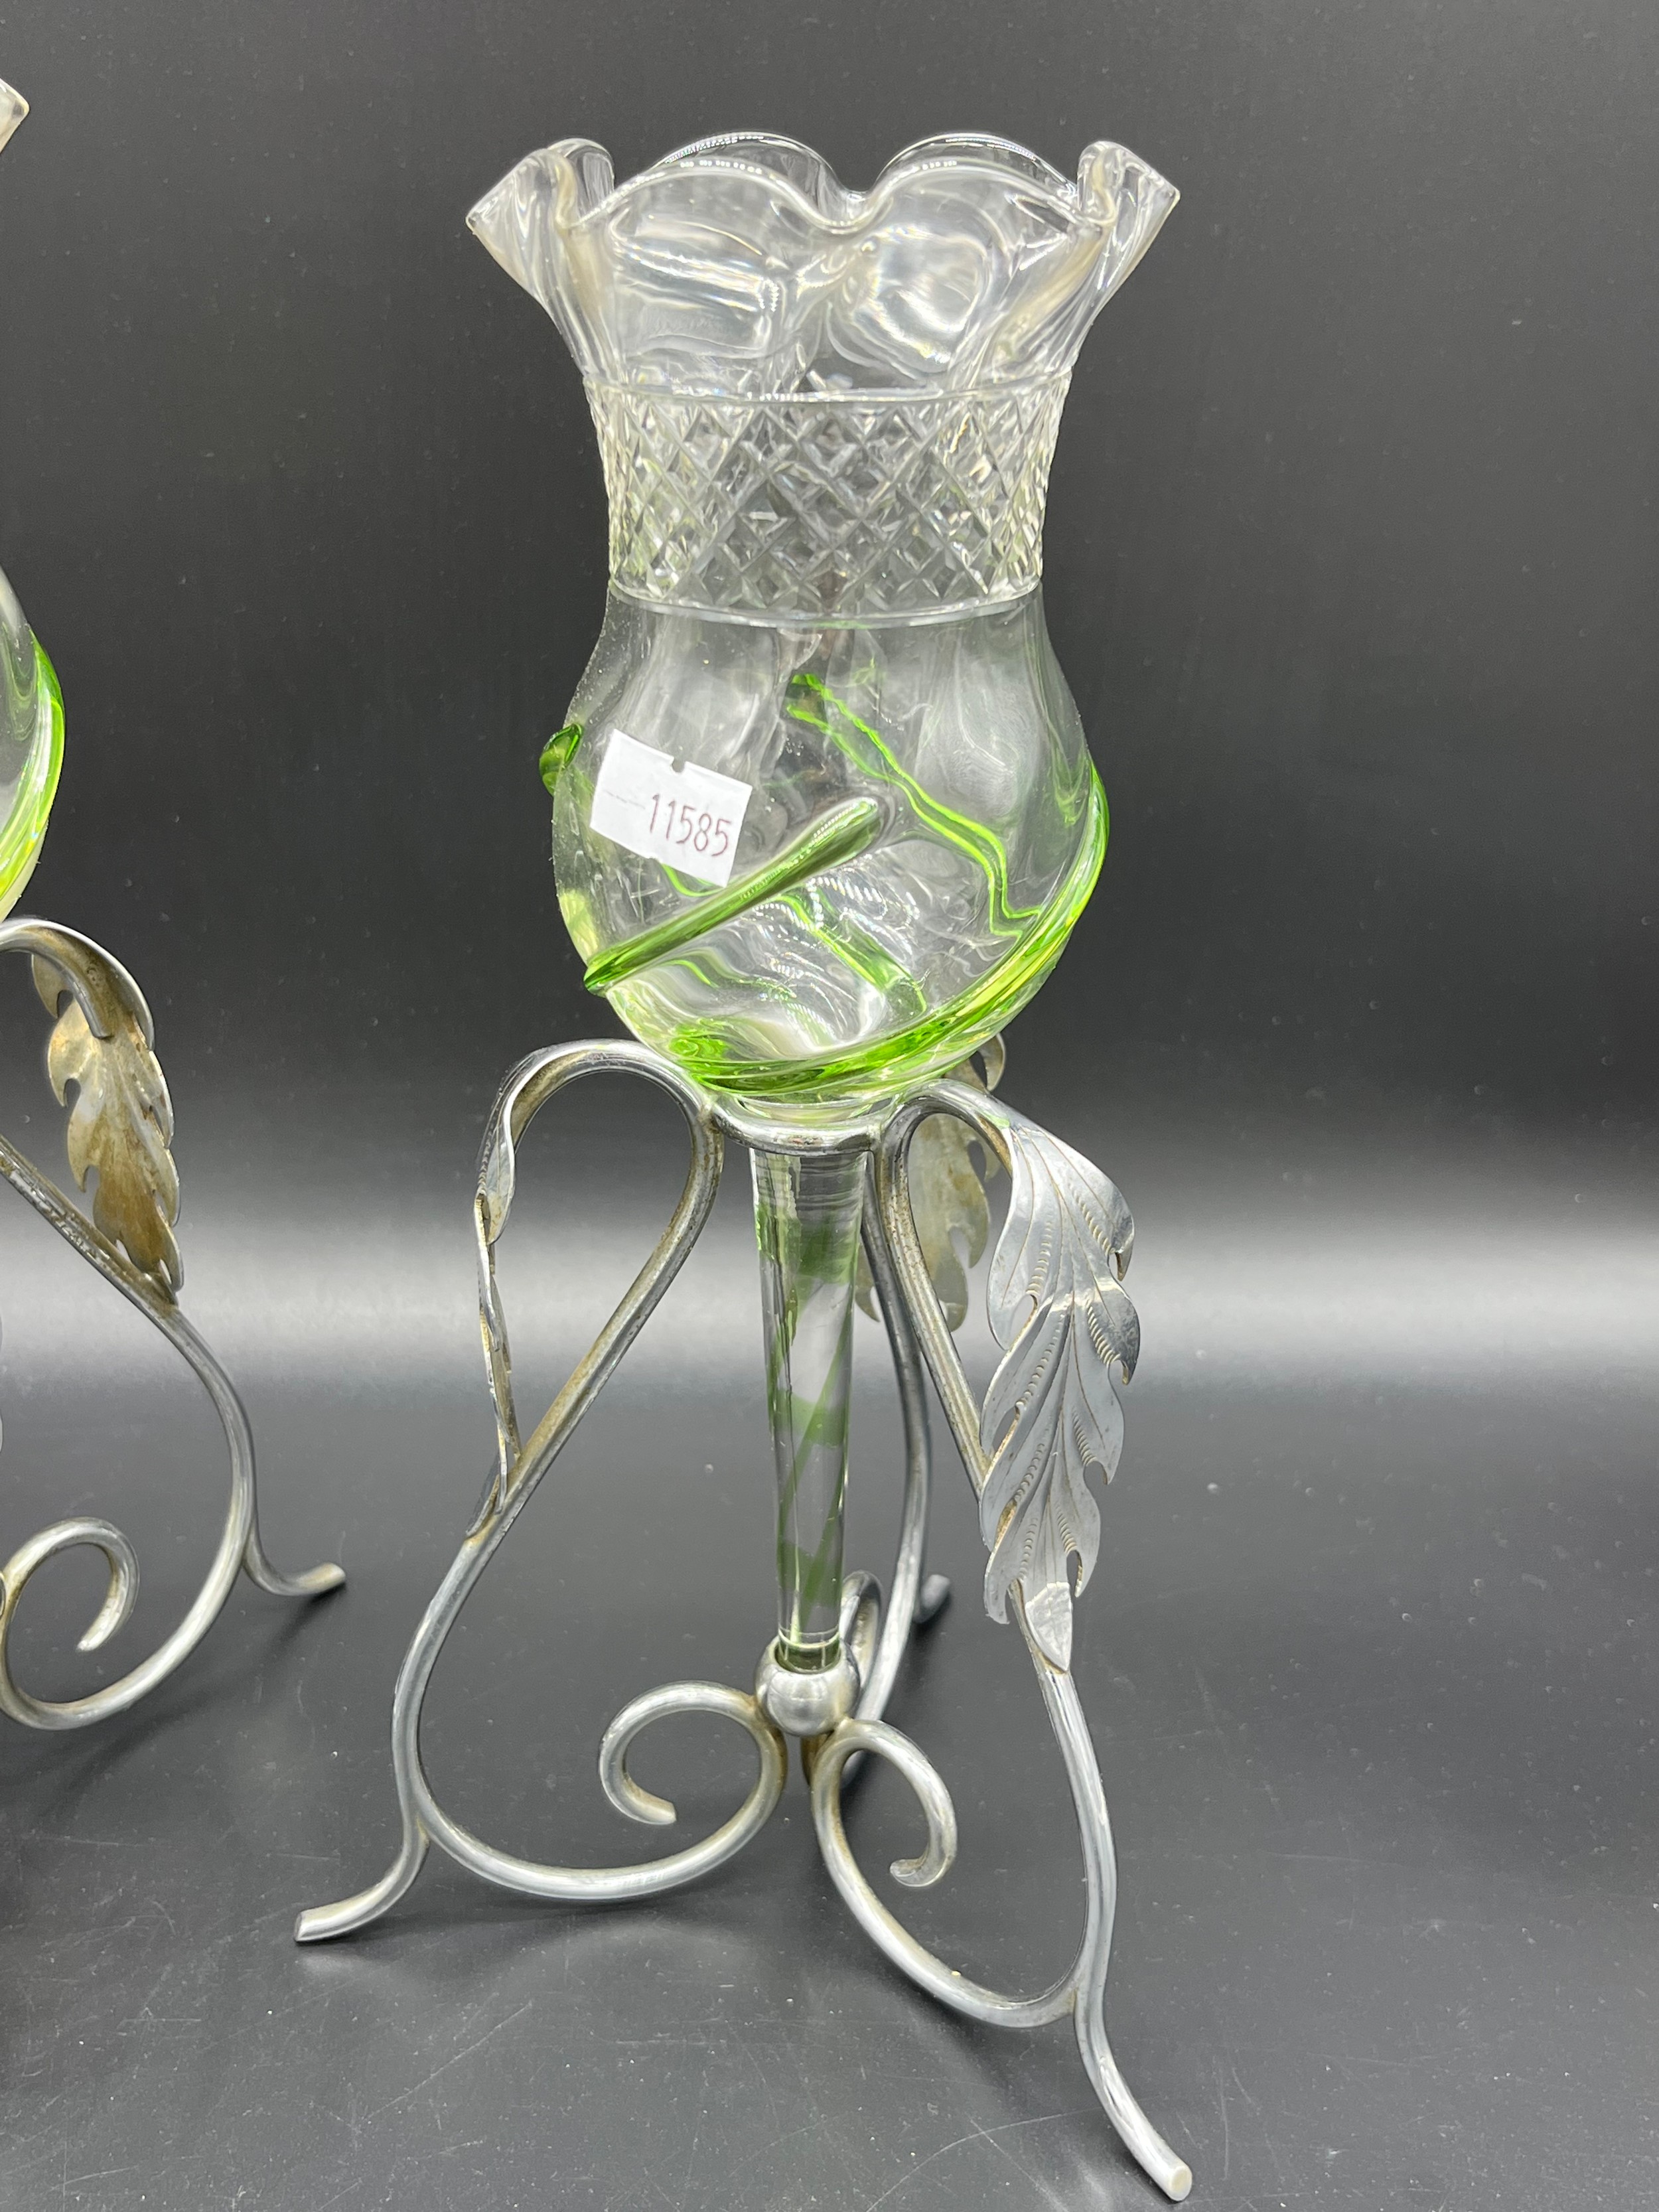 A Pair of antique silver plated and art glass thistle shaped bud bases. [25cm high] [One as found] - Image 3 of 3